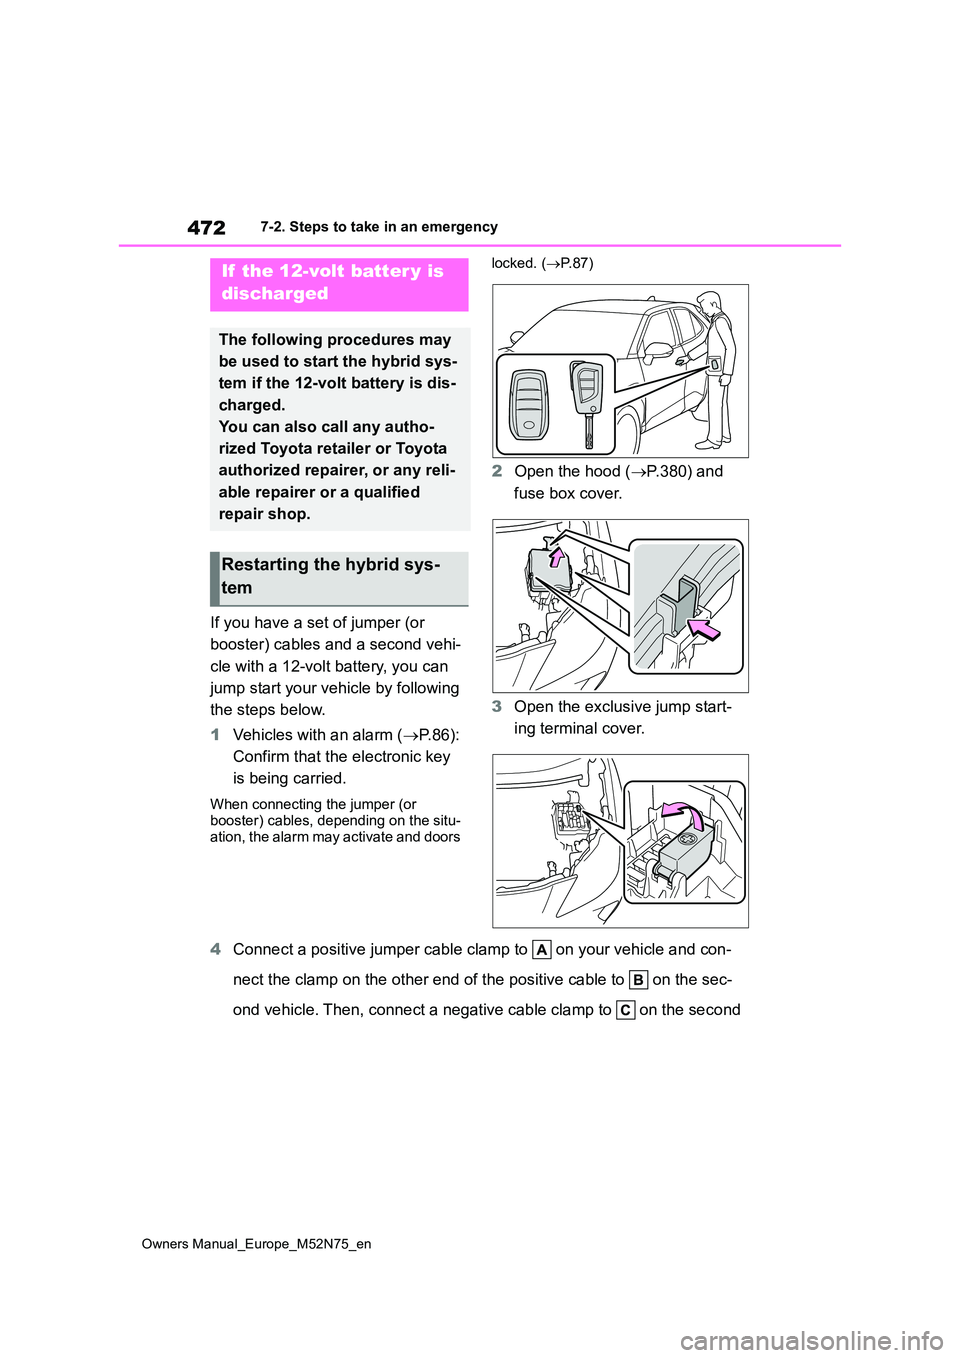 TOYOTA YARIS CROSS 2023  Owners Manual 472
Owners Manual_Europe_M52N75_en
7-2. Steps to take in an emergency
If you have a set of jumper (or  
booster) cables and a second vehi- 
cle with a 12-volt battery, you can  
jump start your vehicl